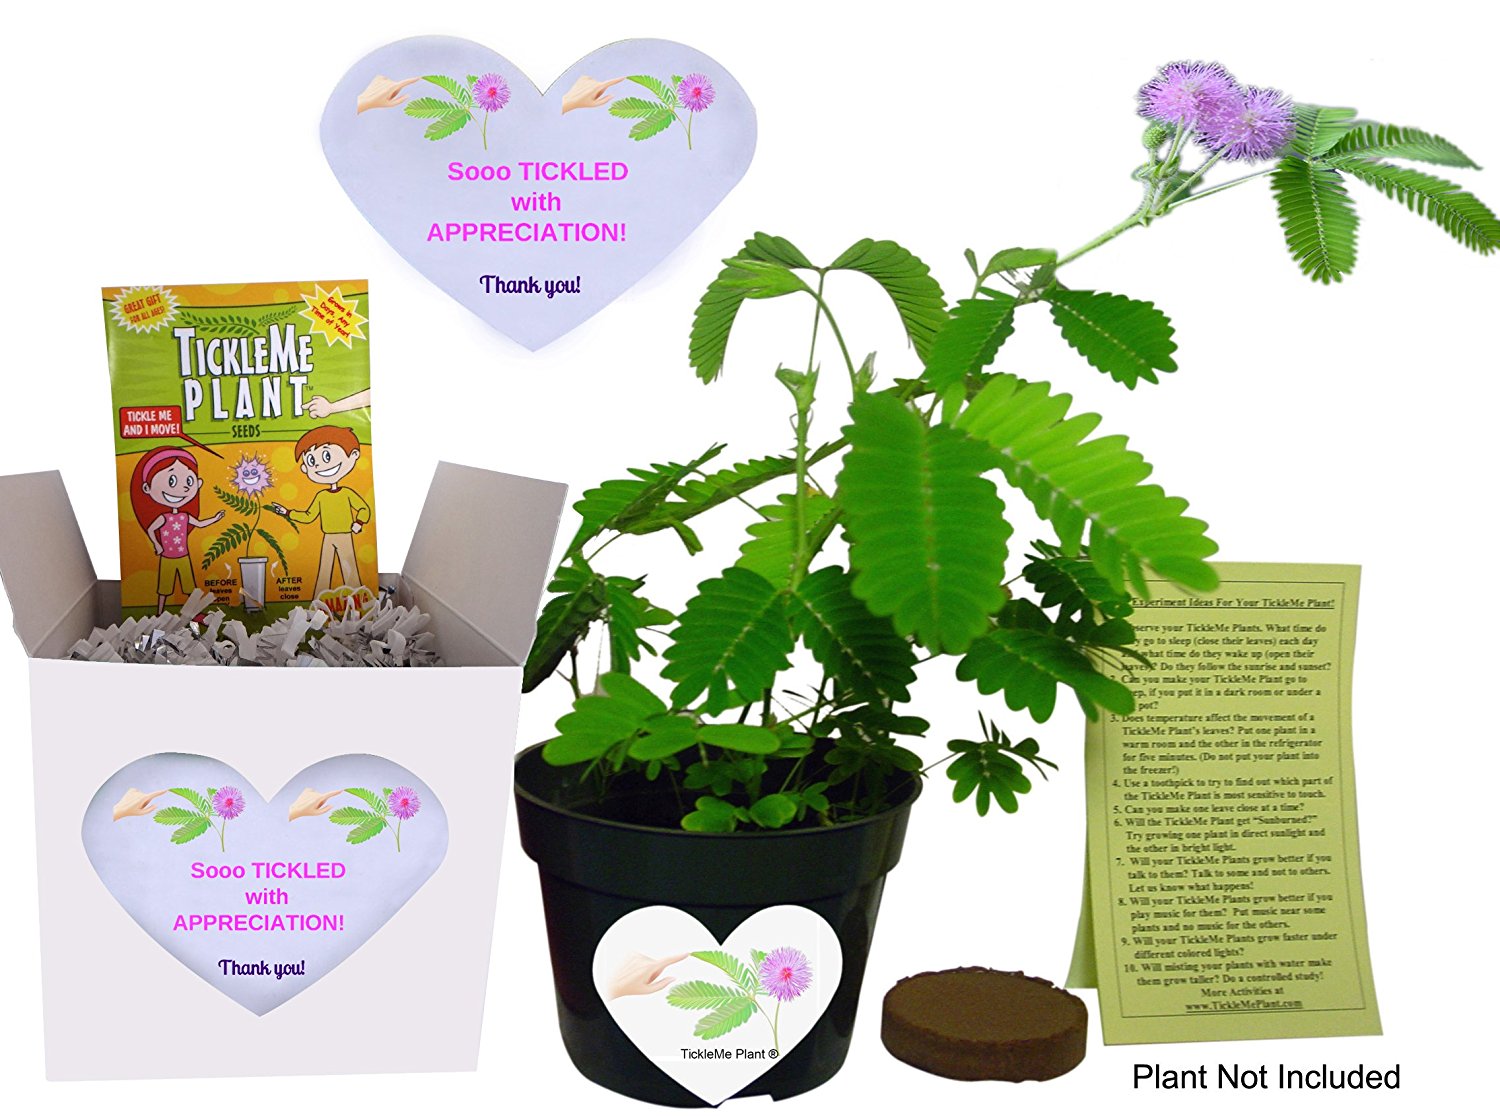 So Tickled With APPRECIATION TickleMe Plant Gift Box set! - Say Thank you with this fun Grow kit